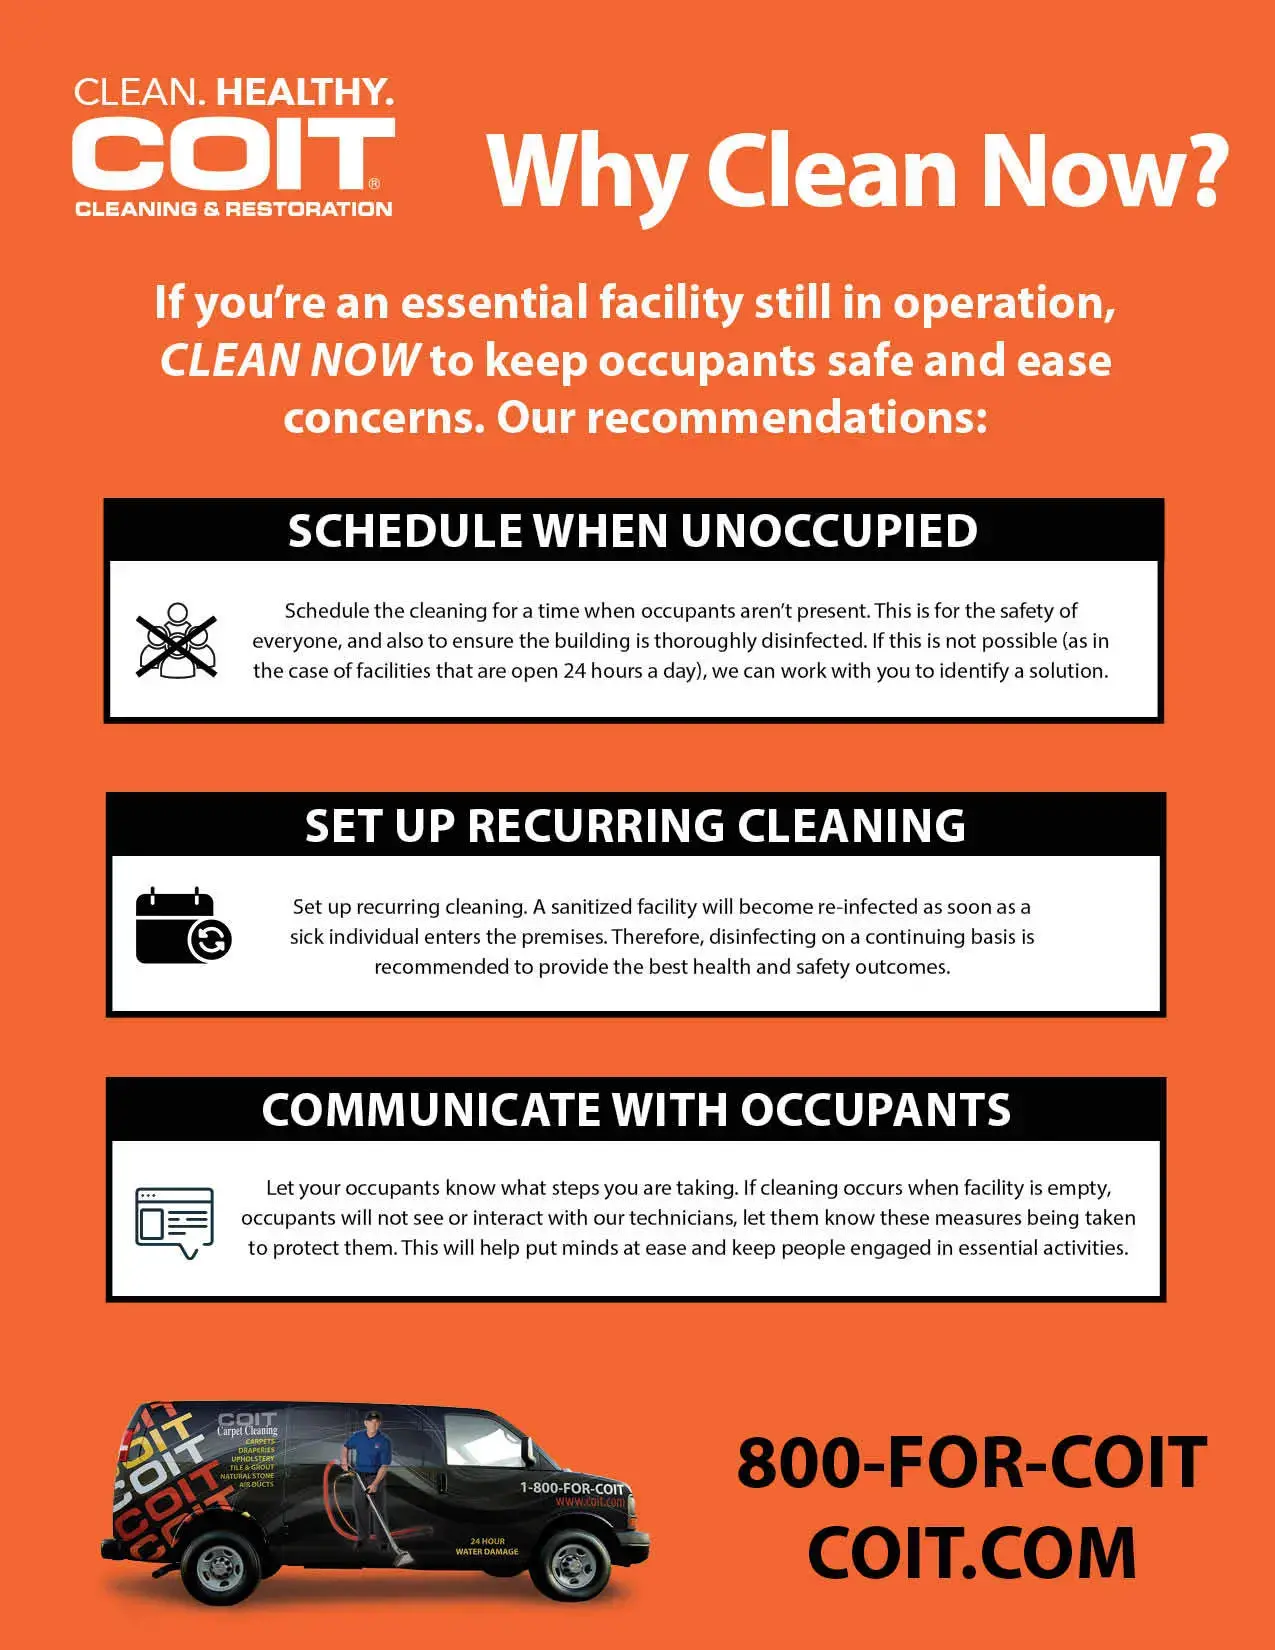 If you're an essential facility still in operation, CLEAN NOW to keep occupants safe and ease concerns. Our recommendations: Schedule when Occupied, Set up recurring cleaning, Communicate with occupants